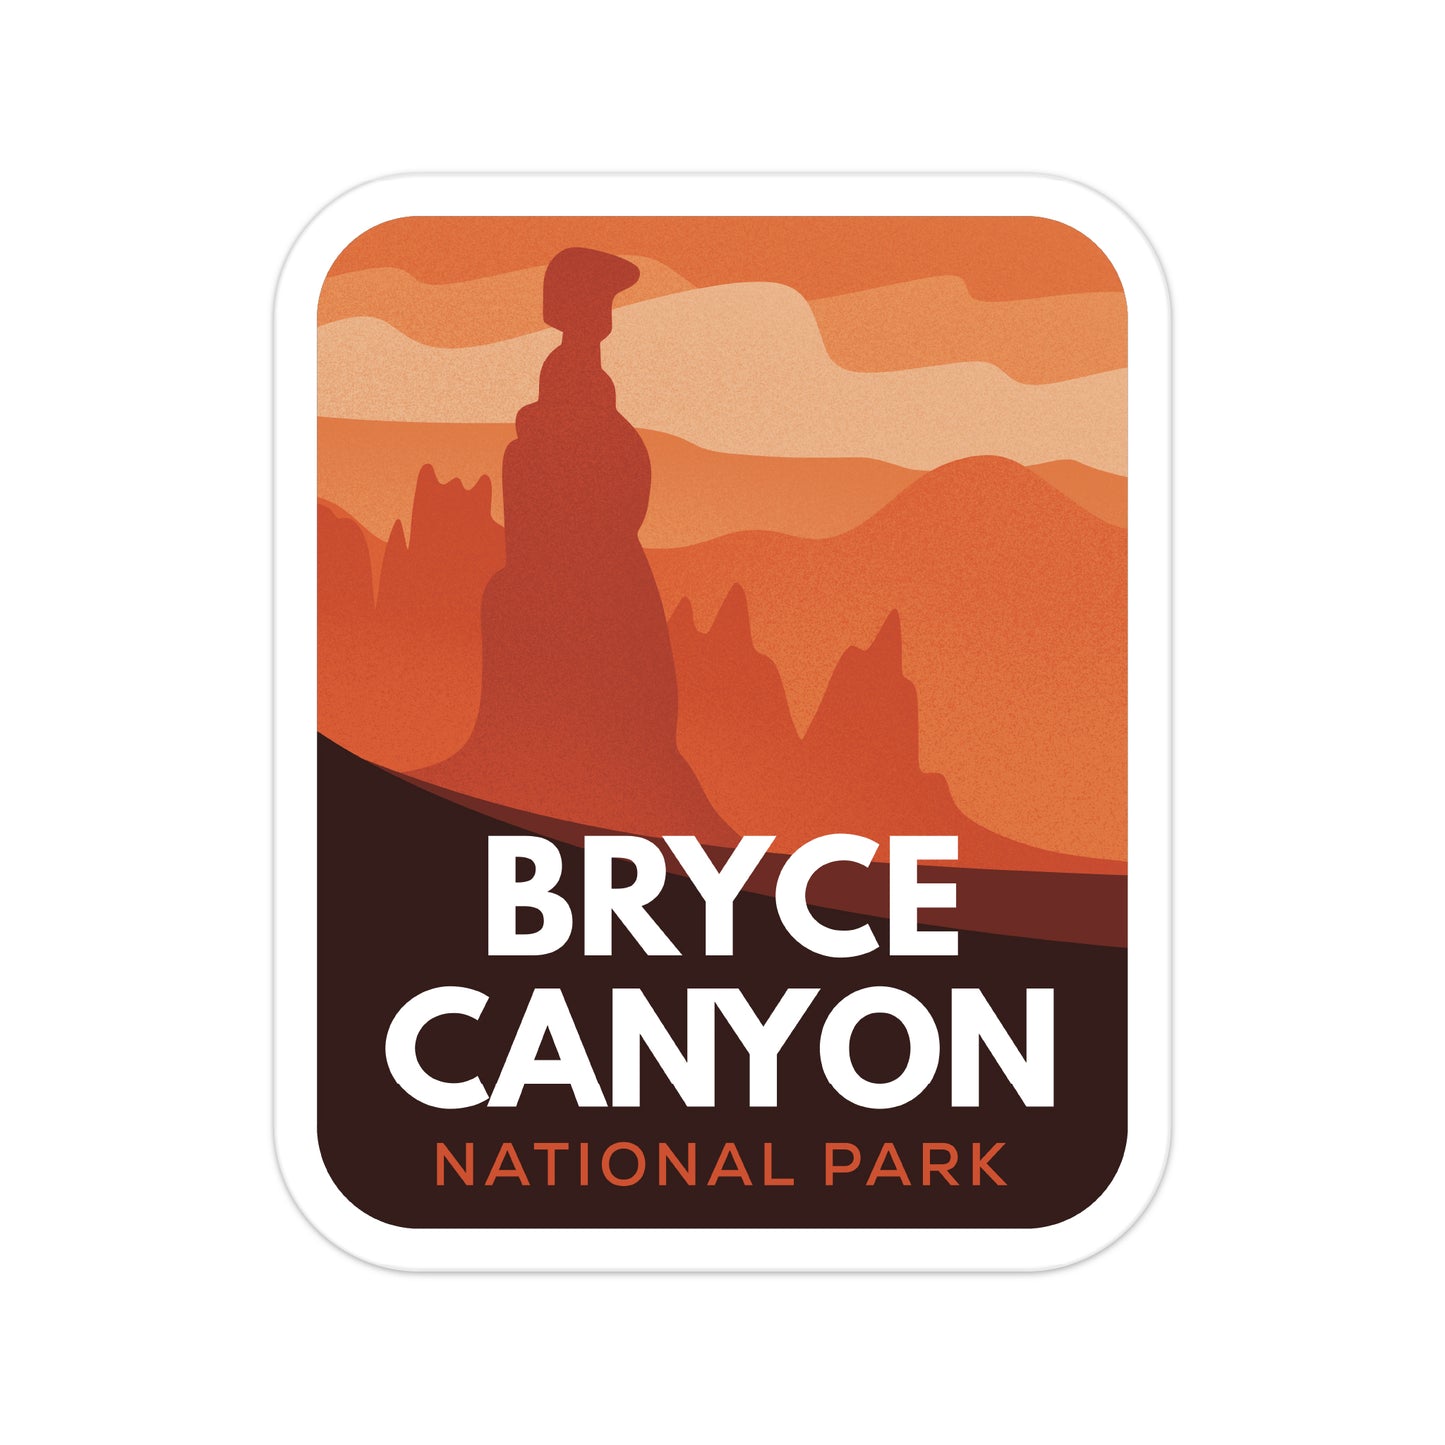 A sticker of Bryce Canyon National Park